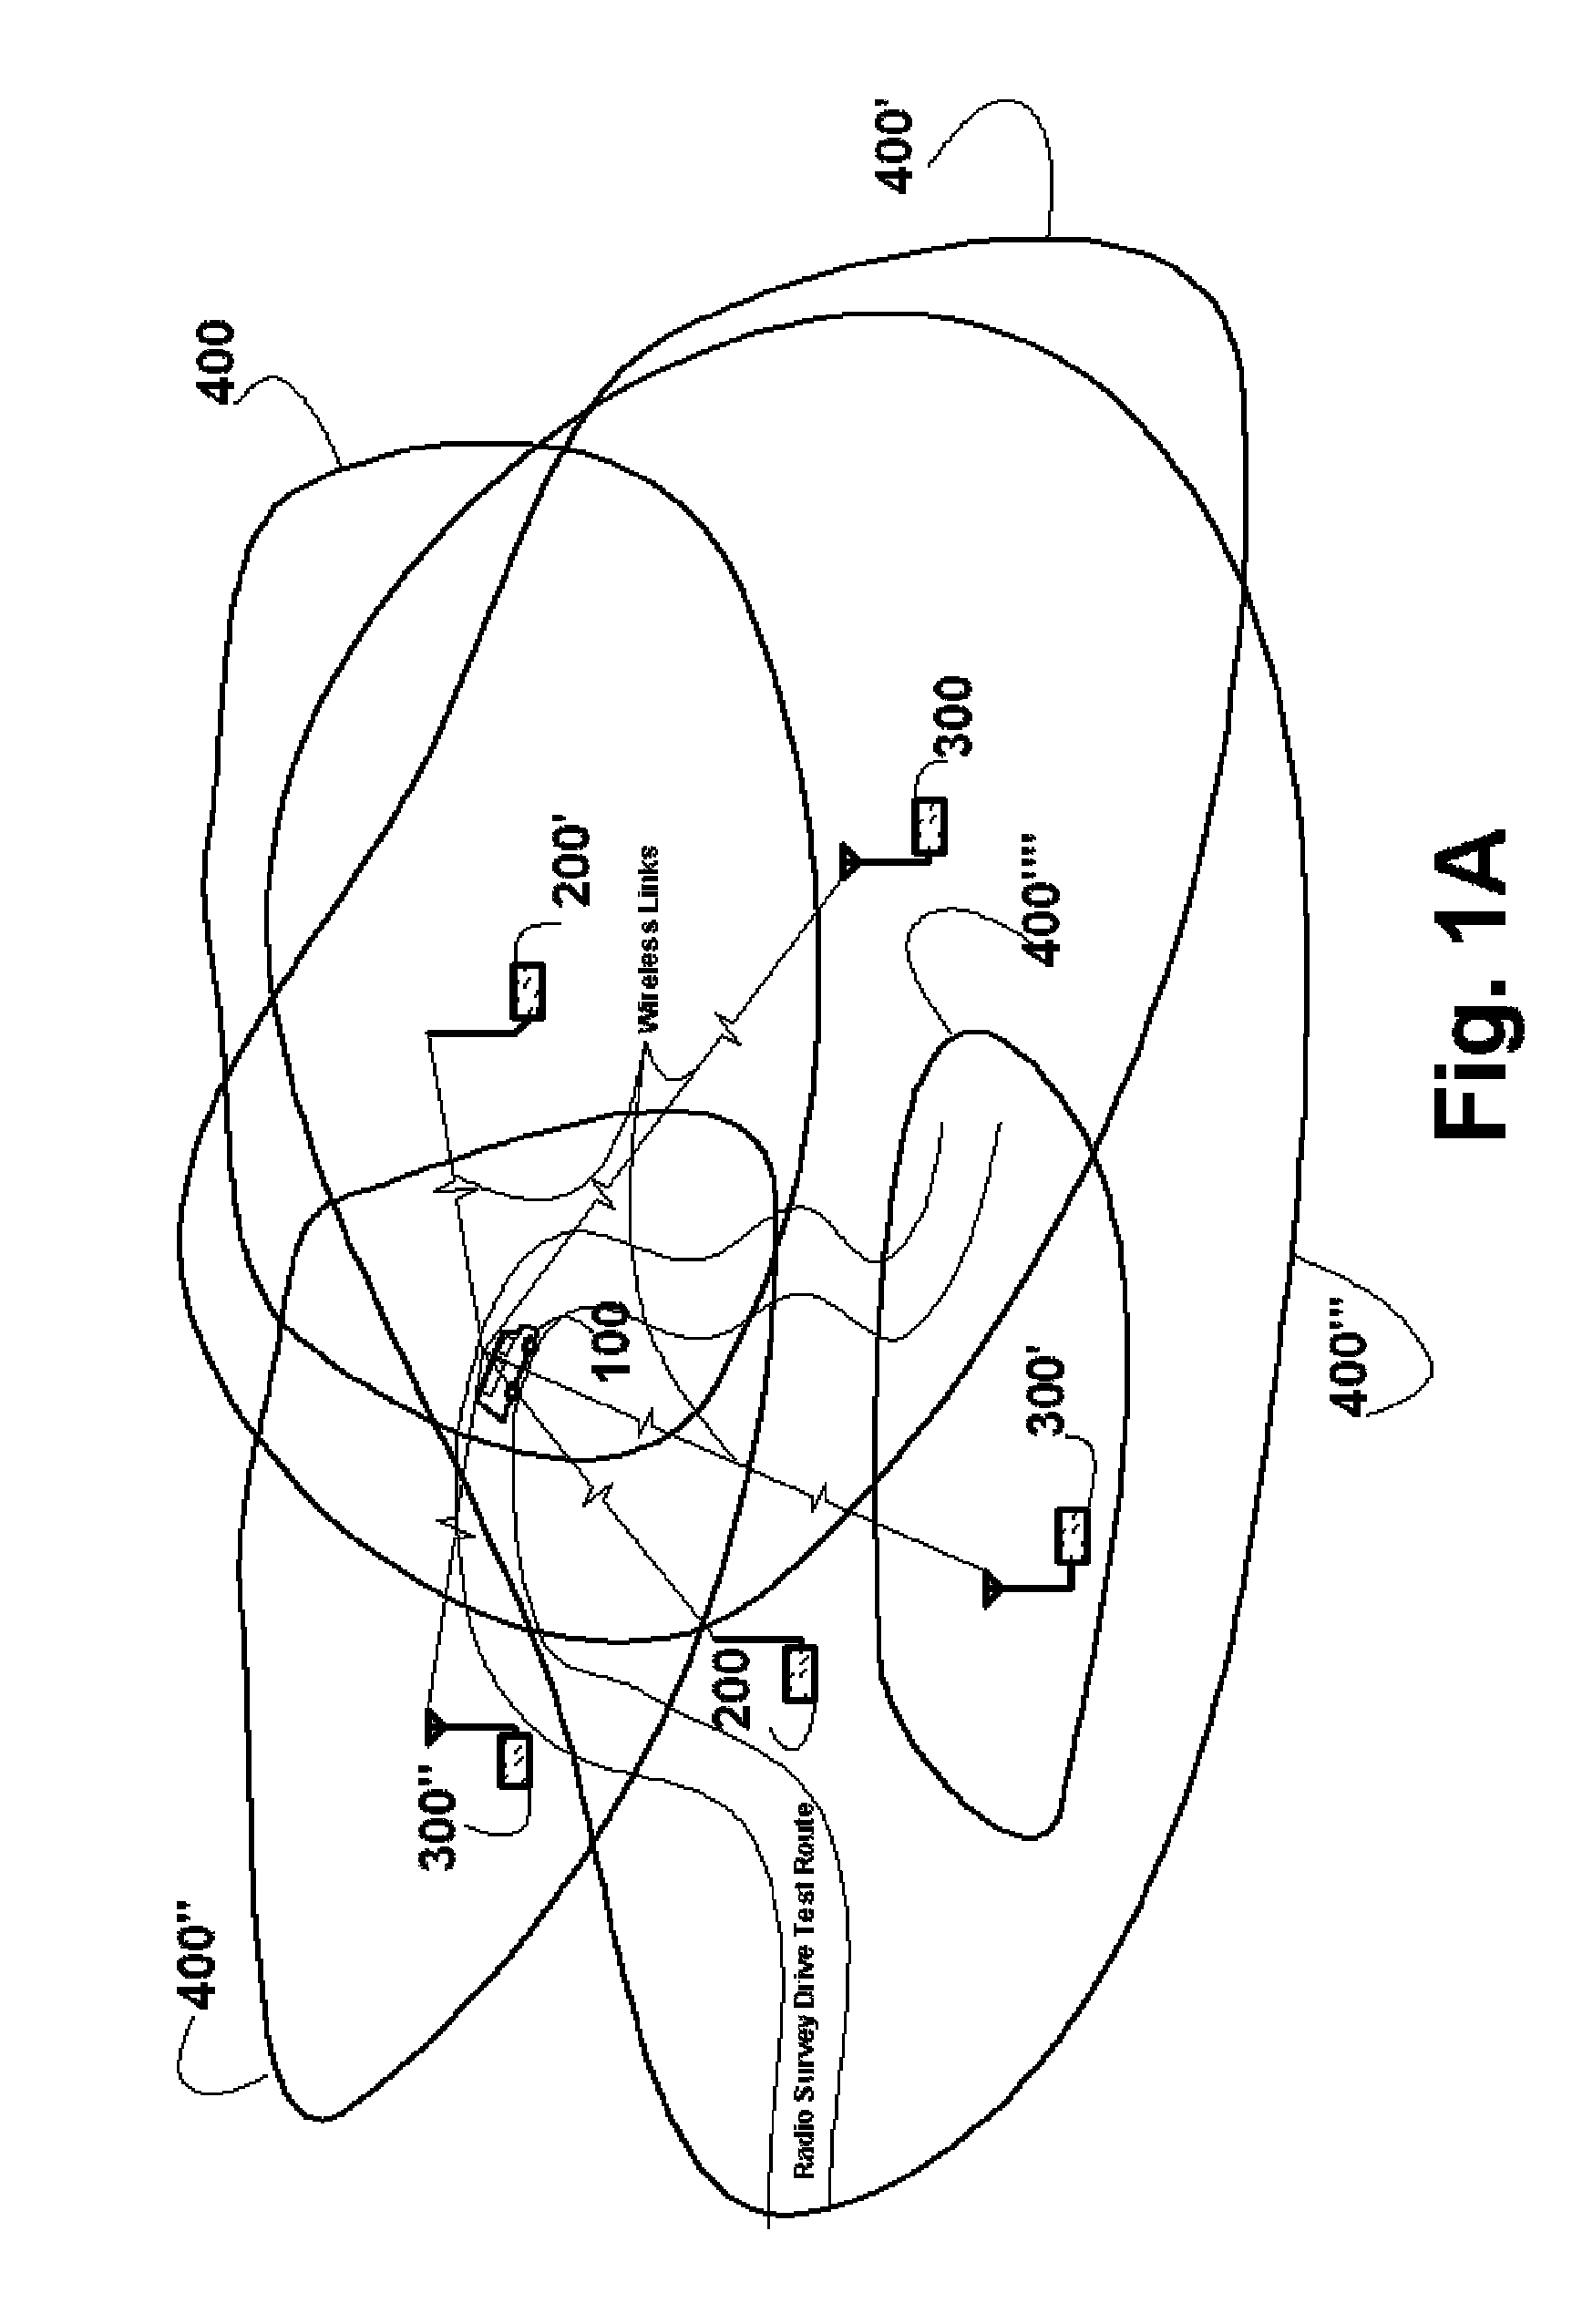 System and method for point to multipoint radio survey